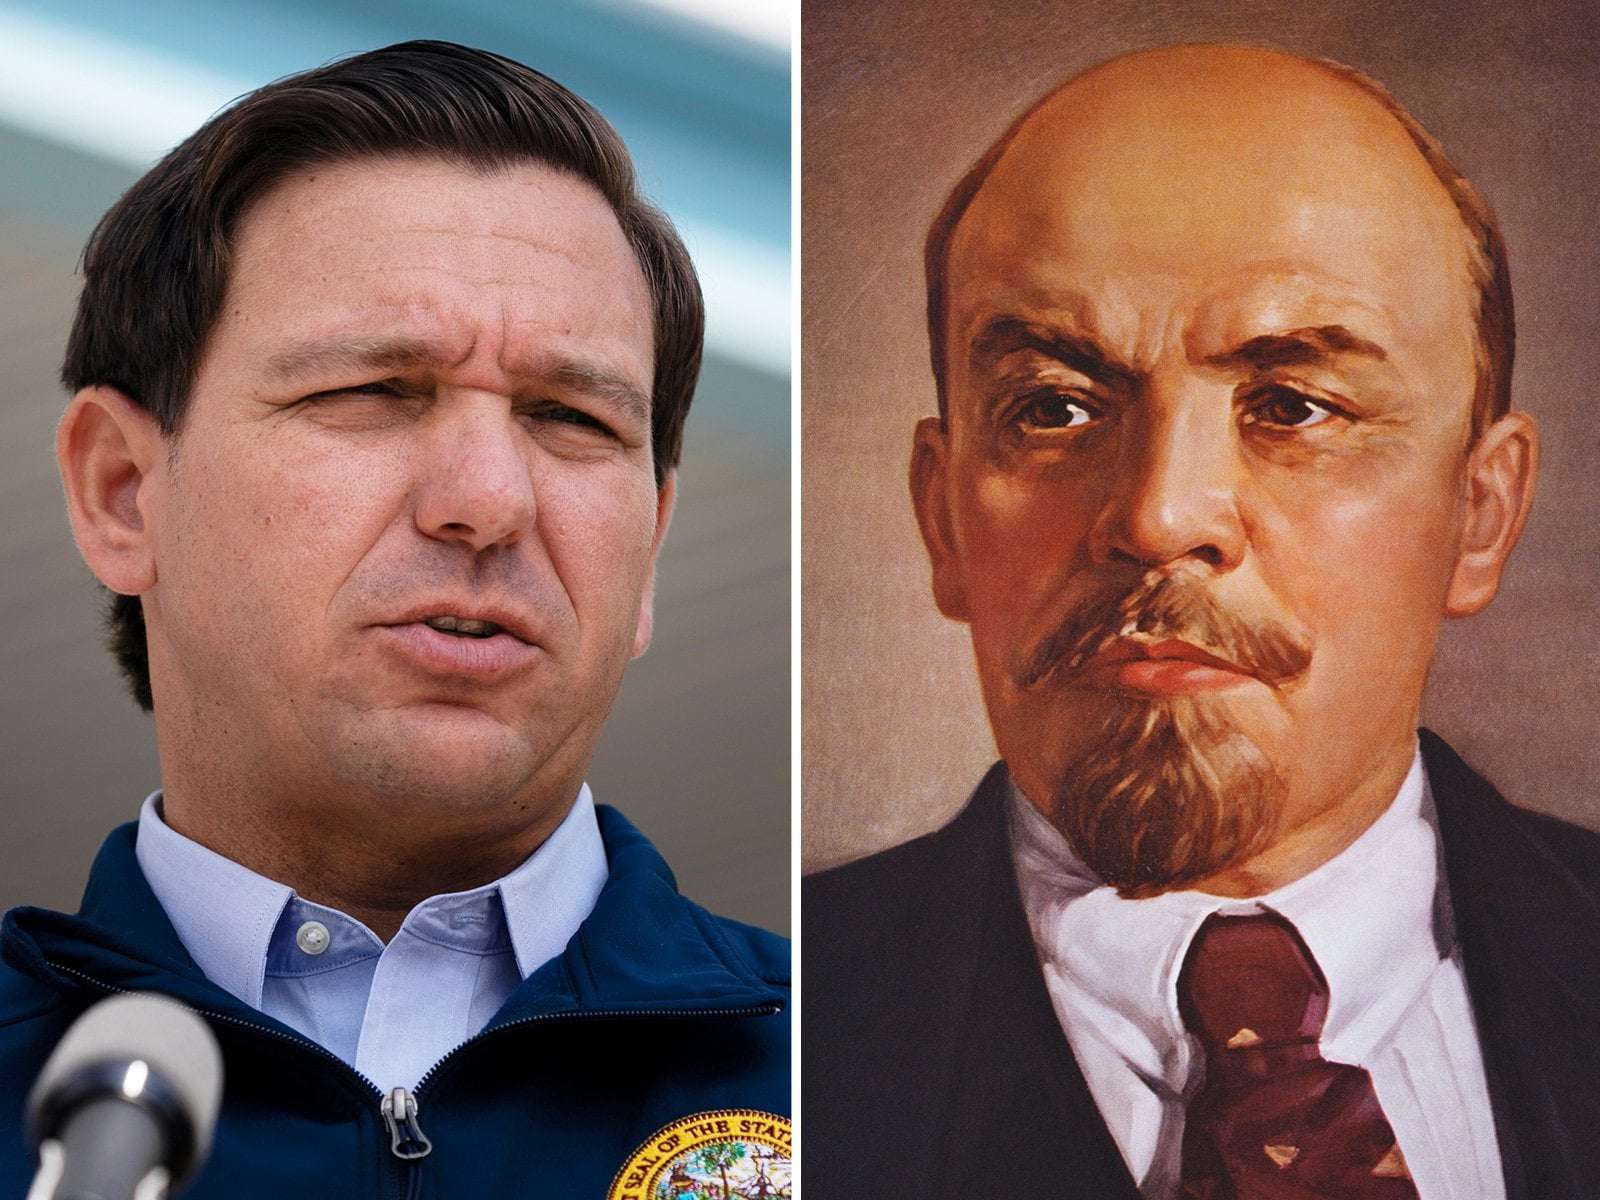 image for DeSantis Policies in Florida Reminiscent of Communism, Historian Says